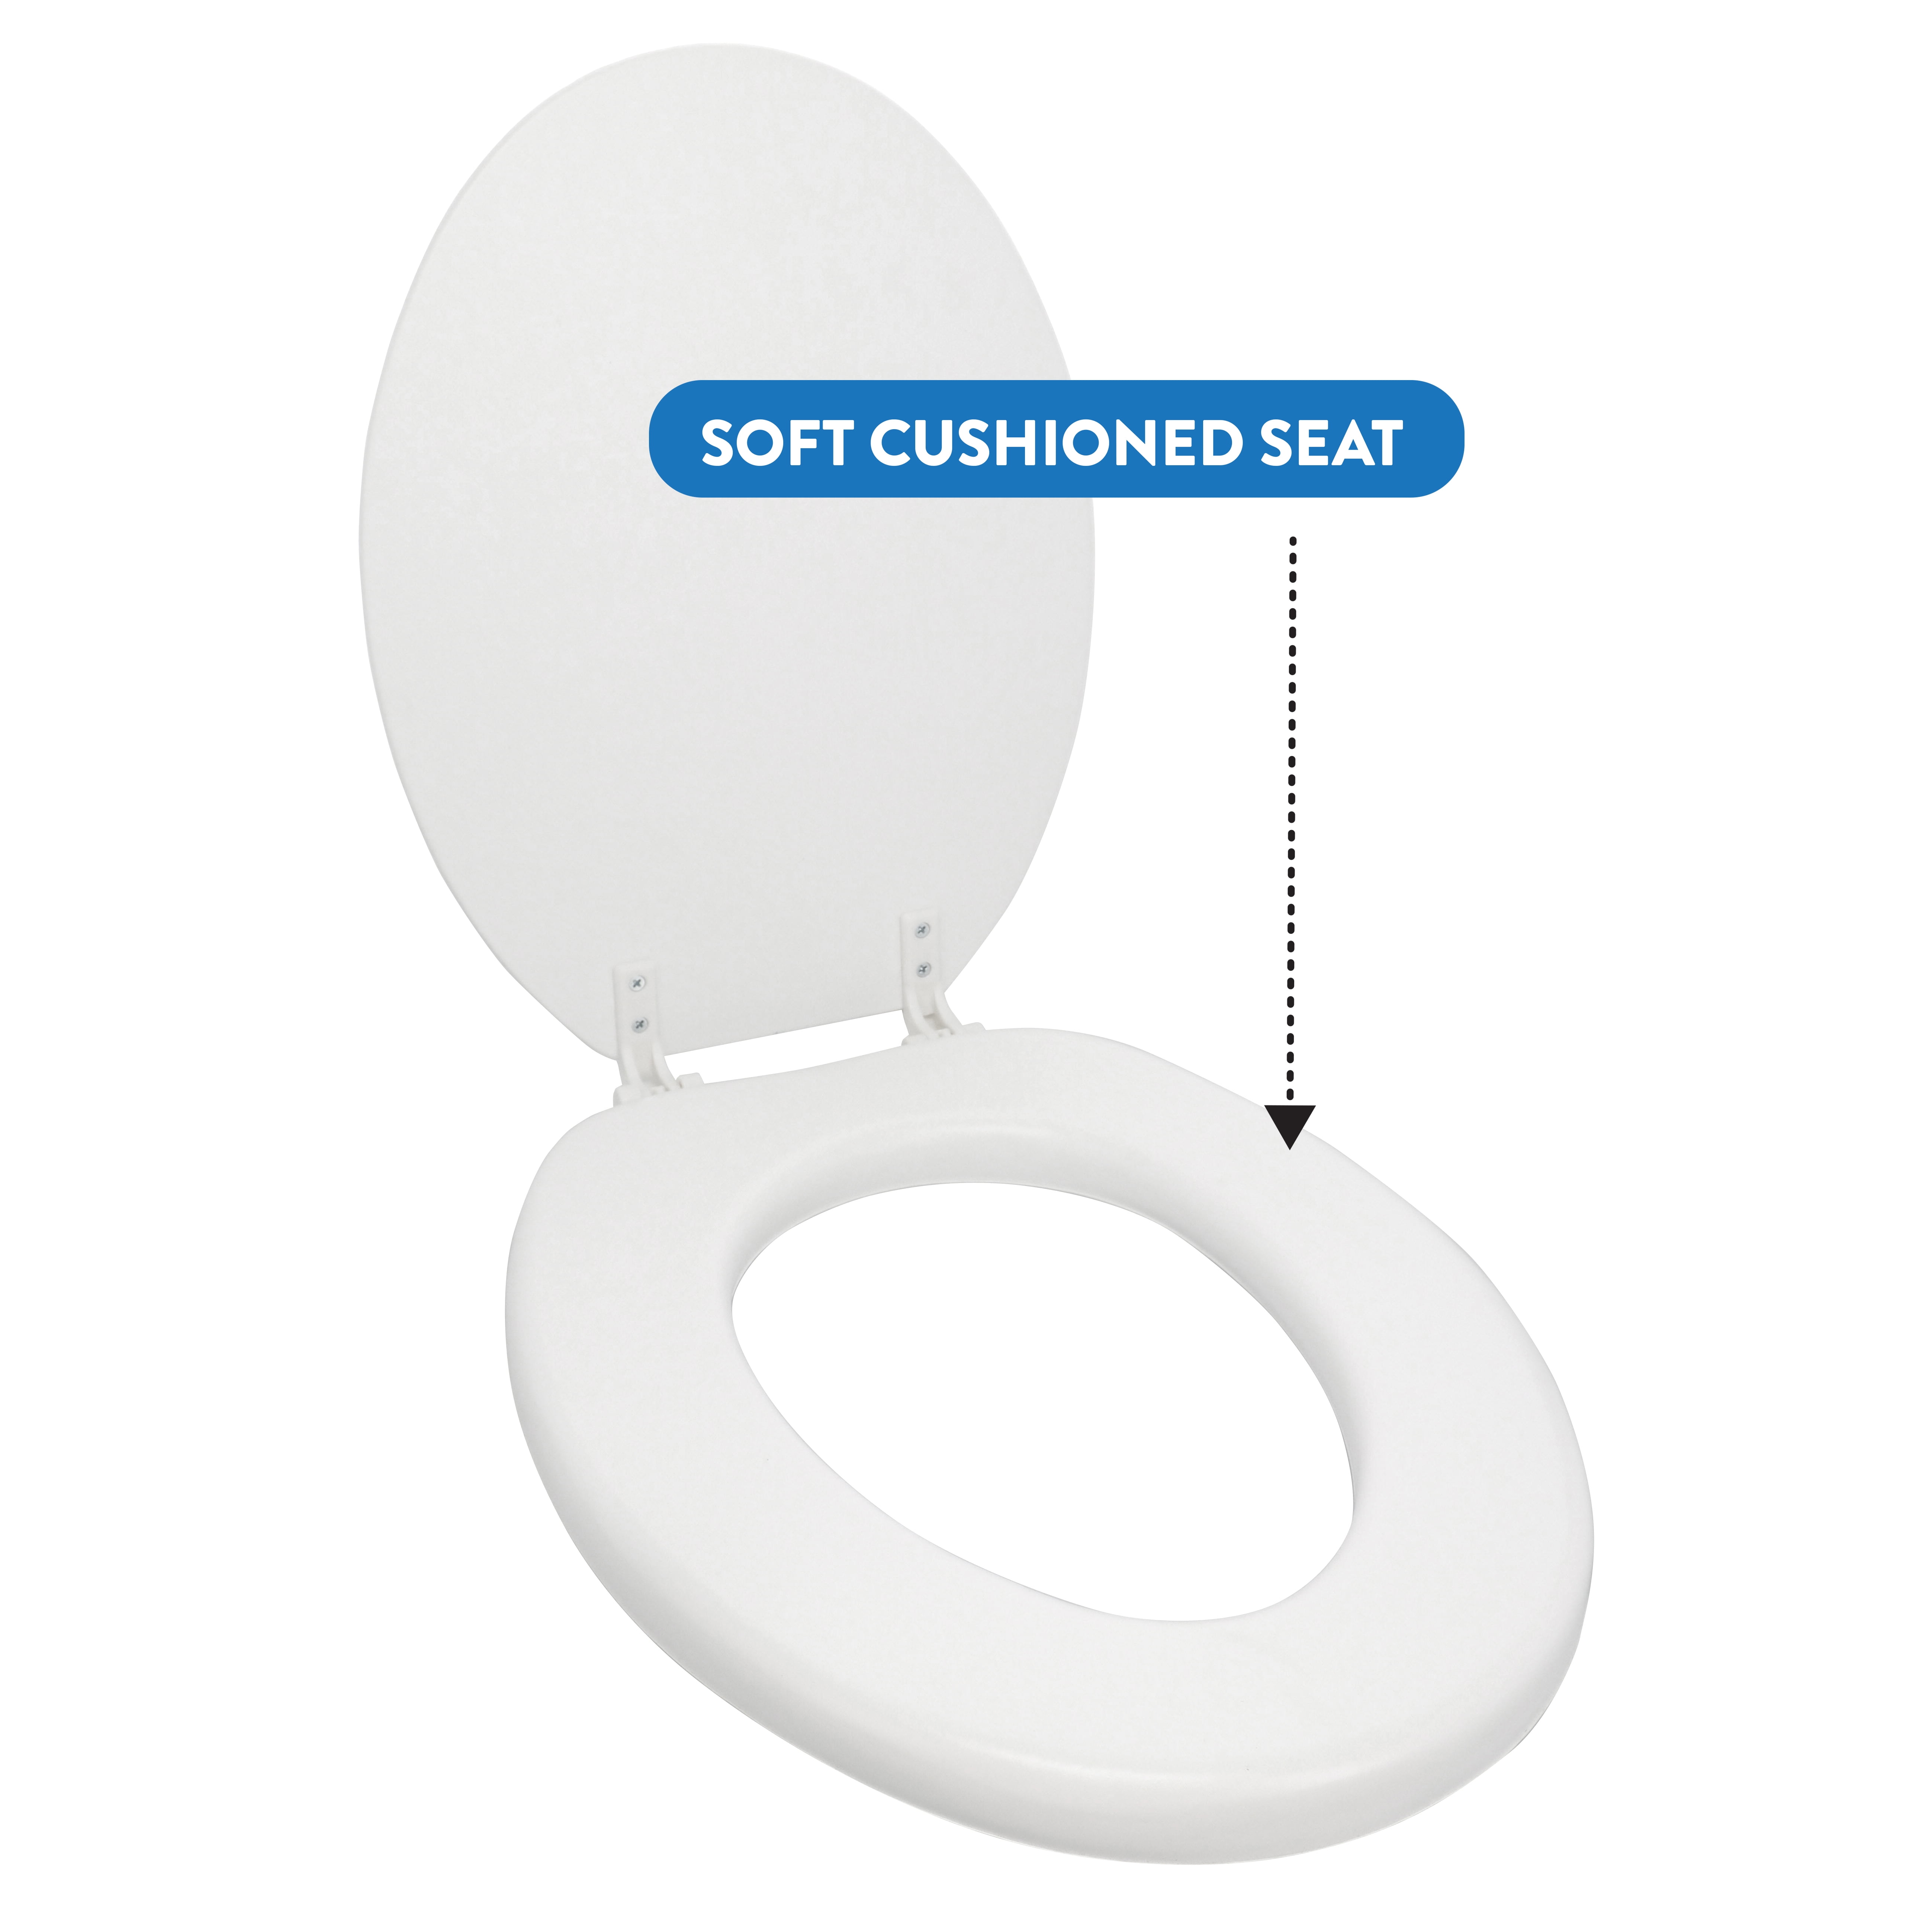 Christmas Savings! SHENGXINY Toilet Lid Cover Clearance Soft Elongated  Vinyl Toilet Seat, Soft Vinyl Cover With Comfort Foam Cushioning - Fits All  Standard Size Fixtures - Easy To Install White 